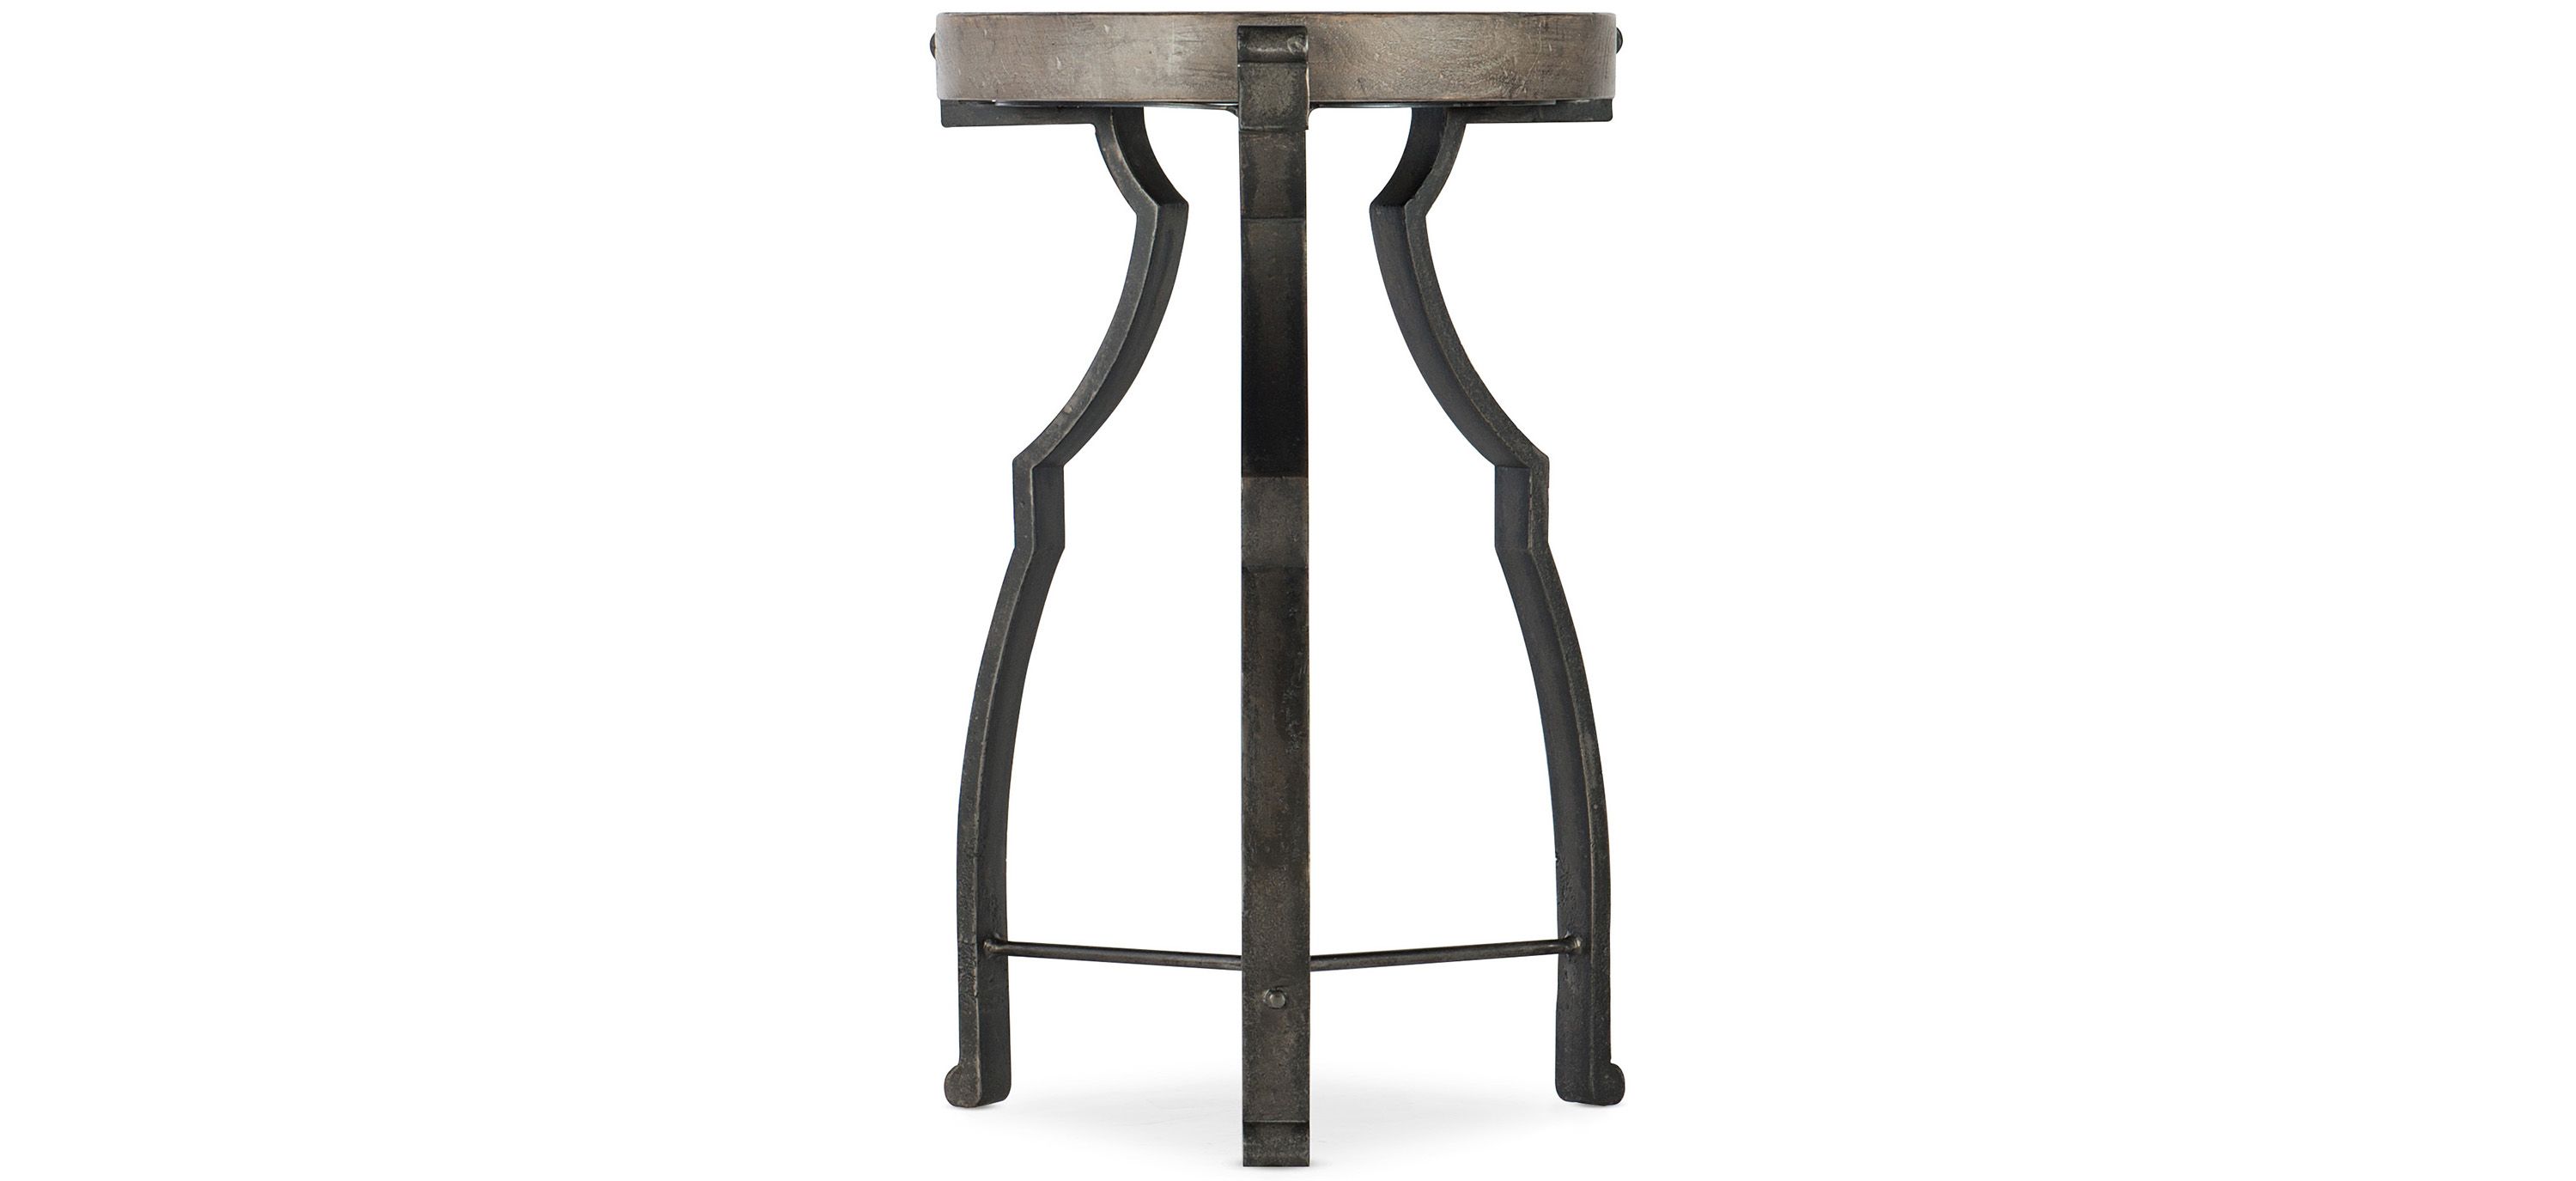 Modele Round End Table